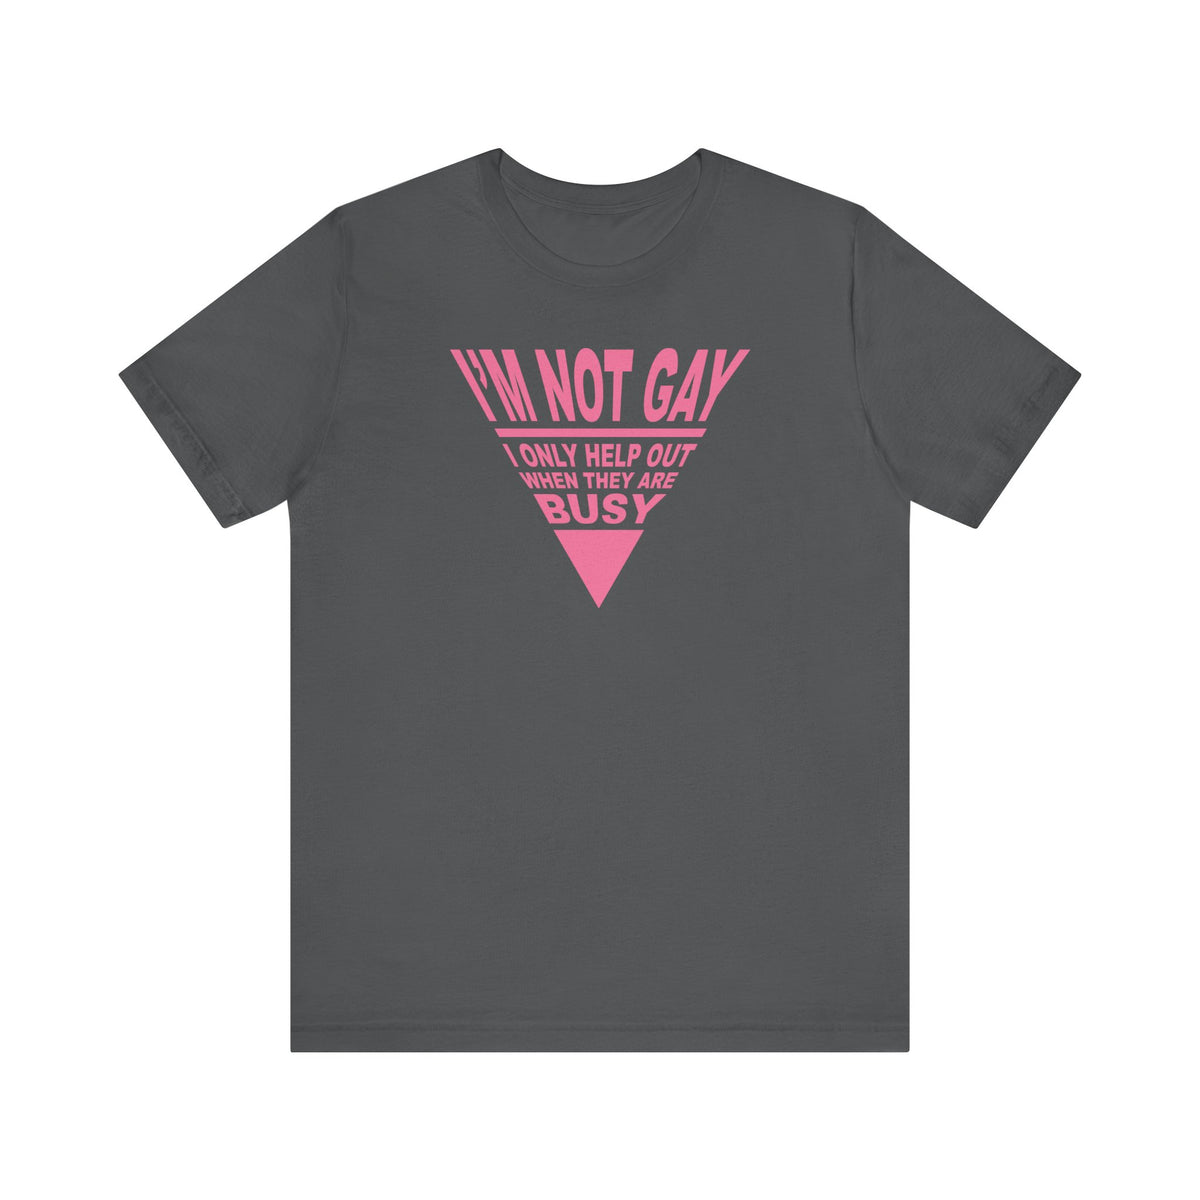 I'm Not Gay - I Only Help Out When They Are Busy - Men's T-Shirt